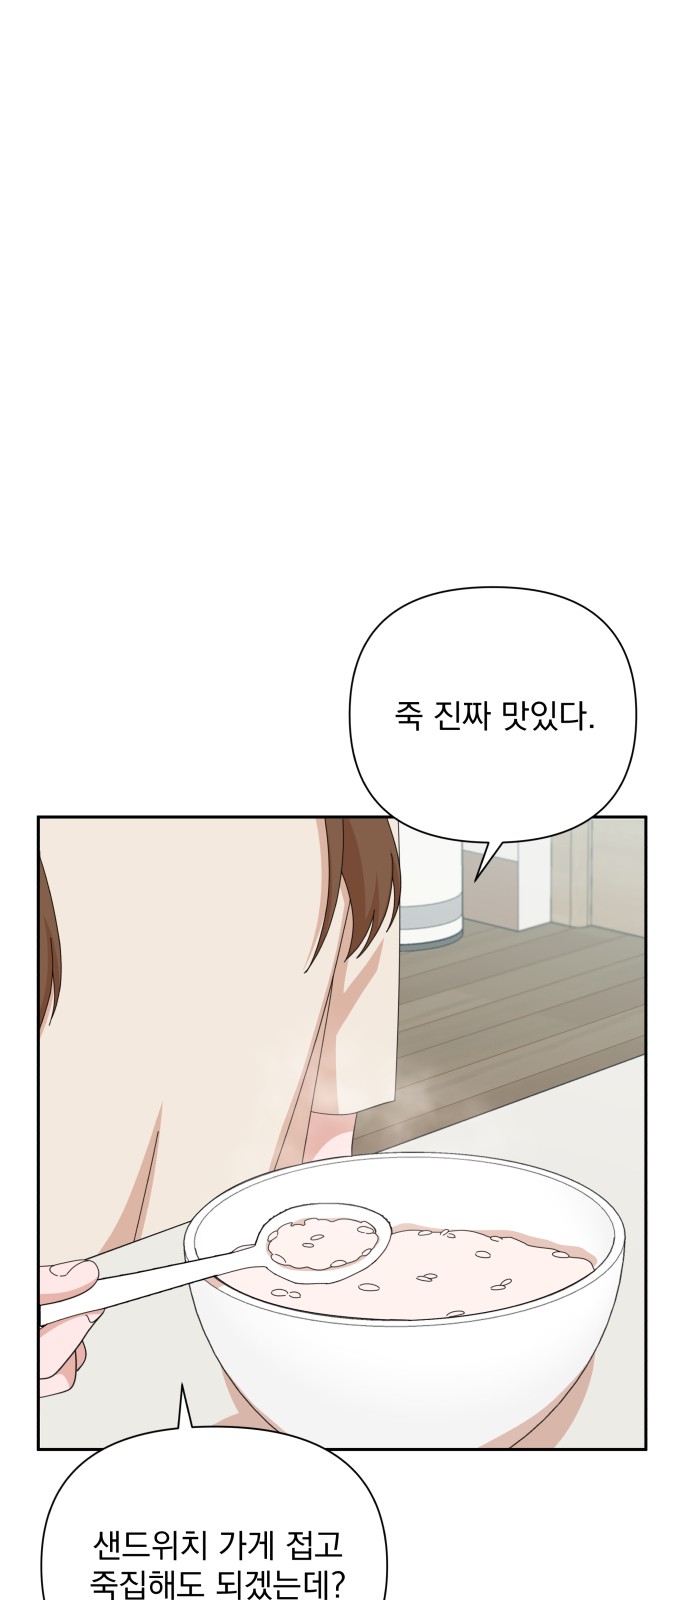 The Man With Pretty Lips - Chapter 44 - Page 1